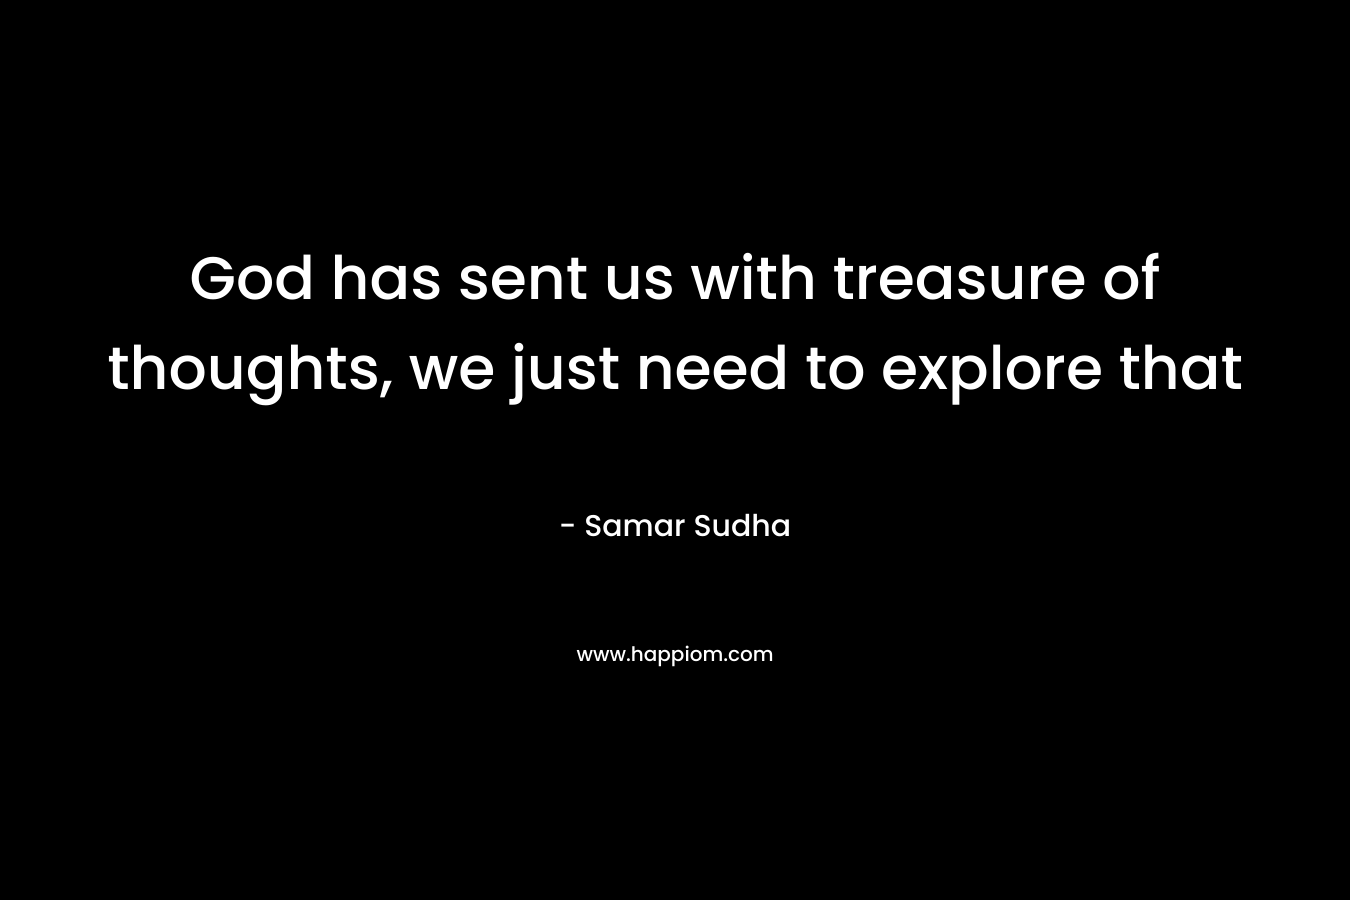 God has sent us with treasure of thoughts, we just need to explore that